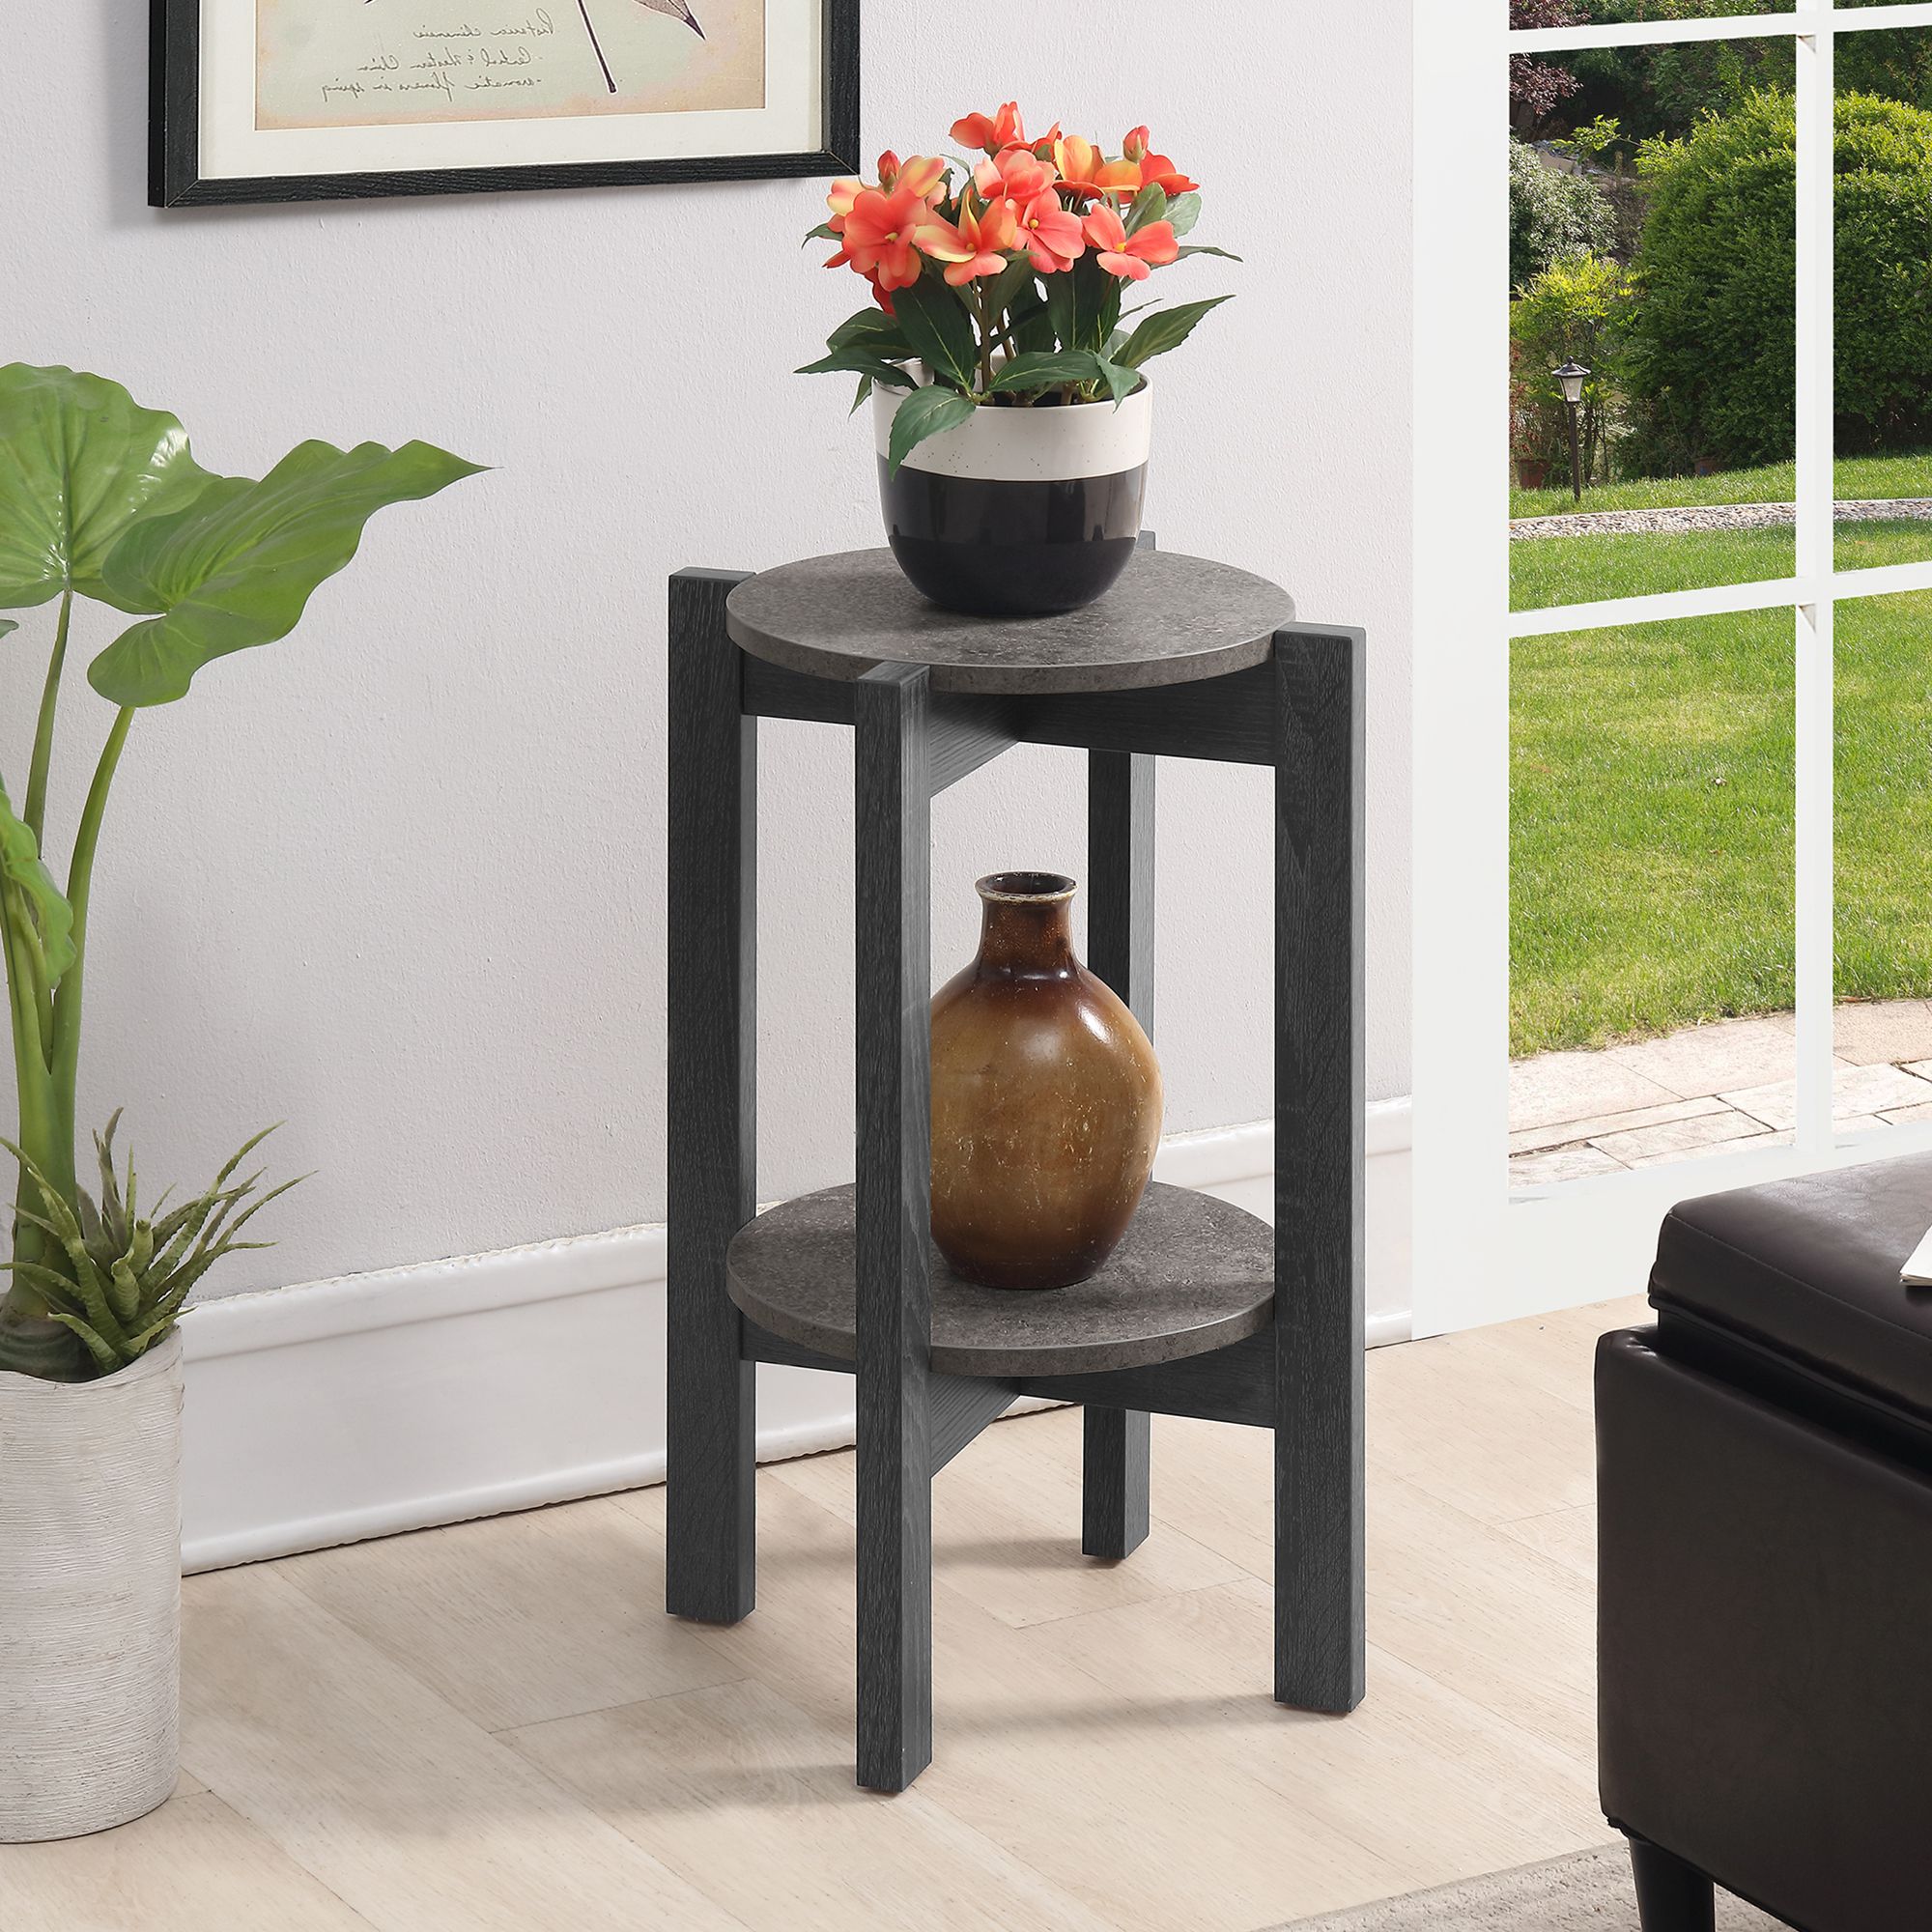 Newport Medium 2 Tier Plant Stand, Faux Cement/weathered Gray – Walmart For Weathered Gray Plant Stands (View 6 of 15)